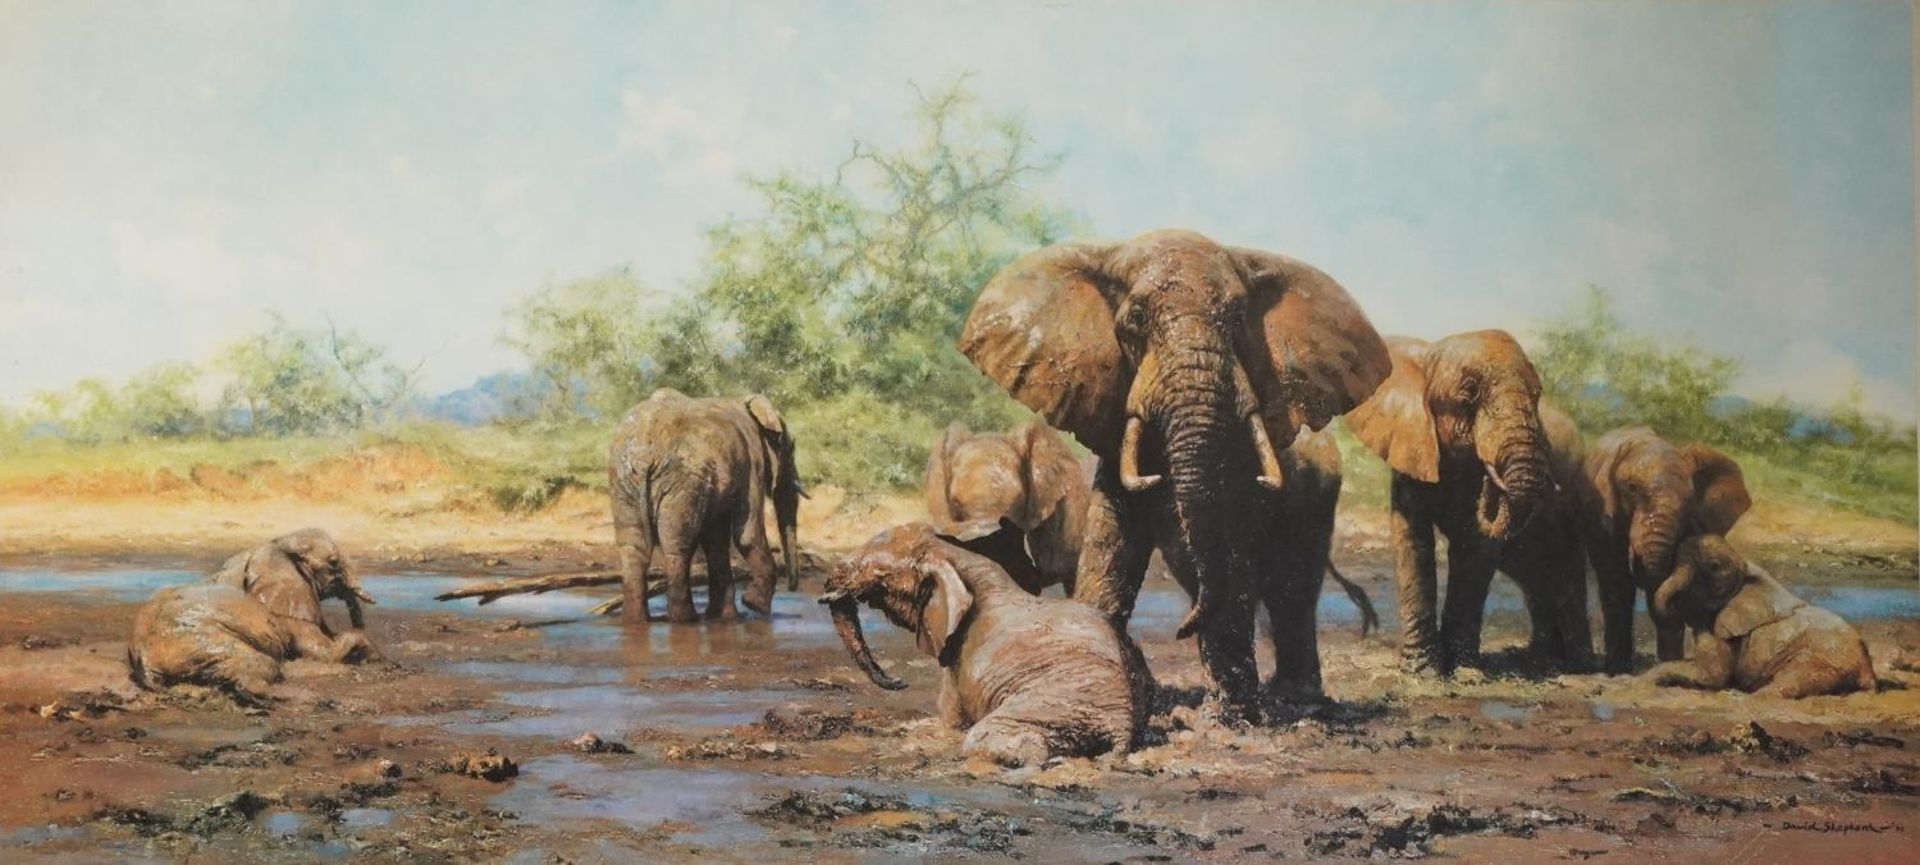 David Shepherd - Elephants, pencil signed print with embossed watermark, limited edition 357/850,